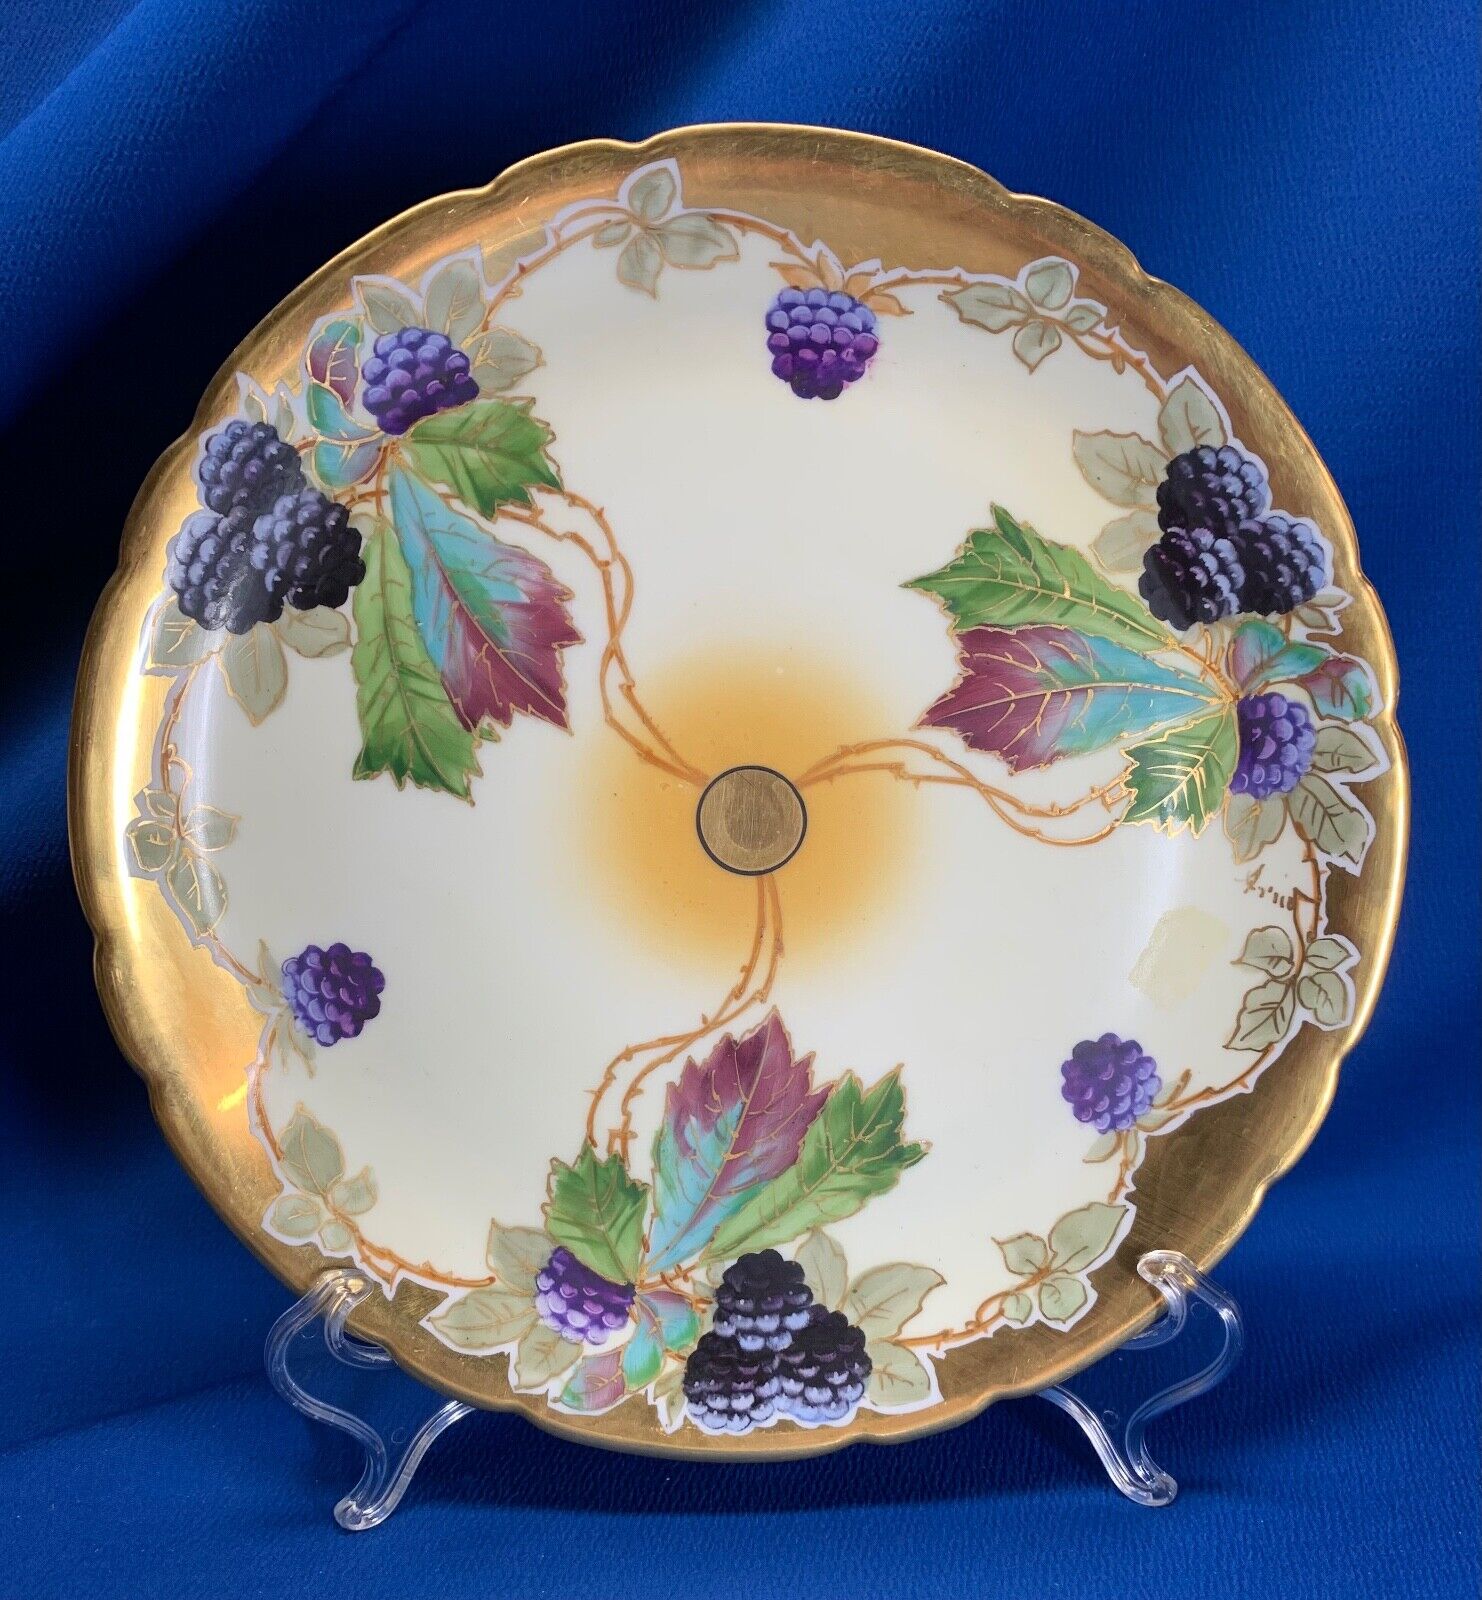 STOUFFER STUDIOS HAND-PAINTED BLACKBERRIES PLATE SIGNED BY EDITH ARNO  8.75\